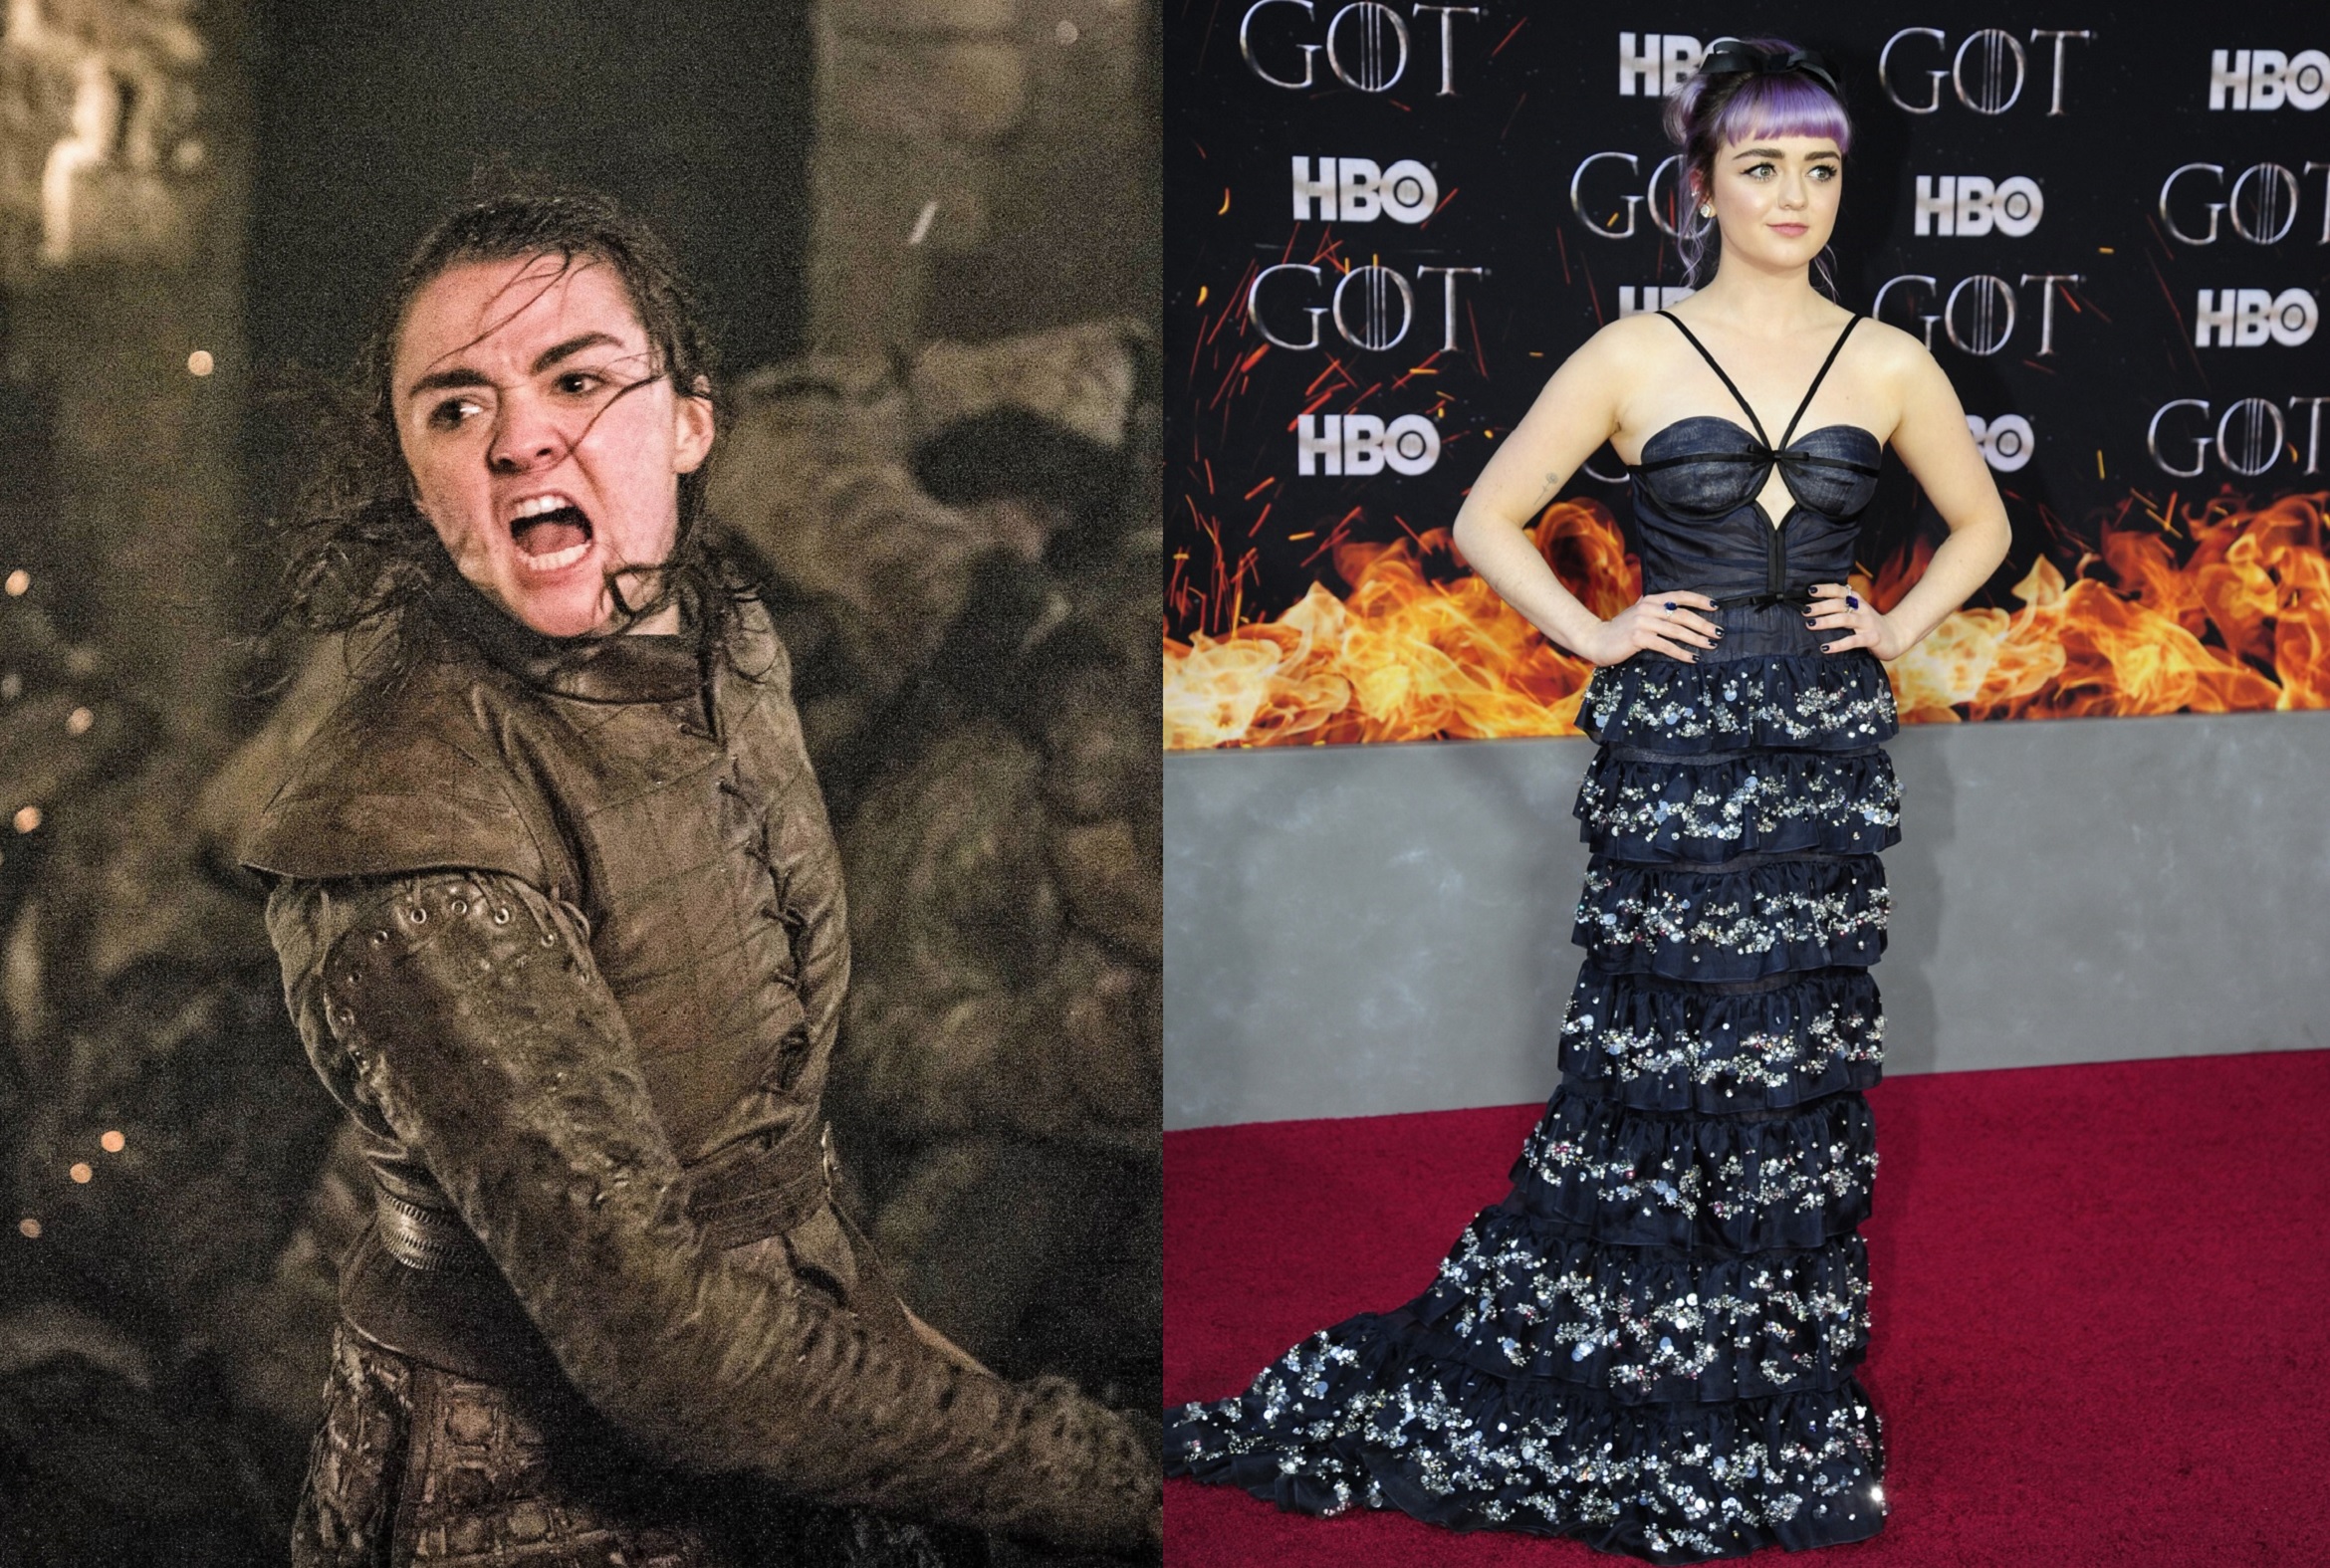 Game of Thrones Characters Then and Now